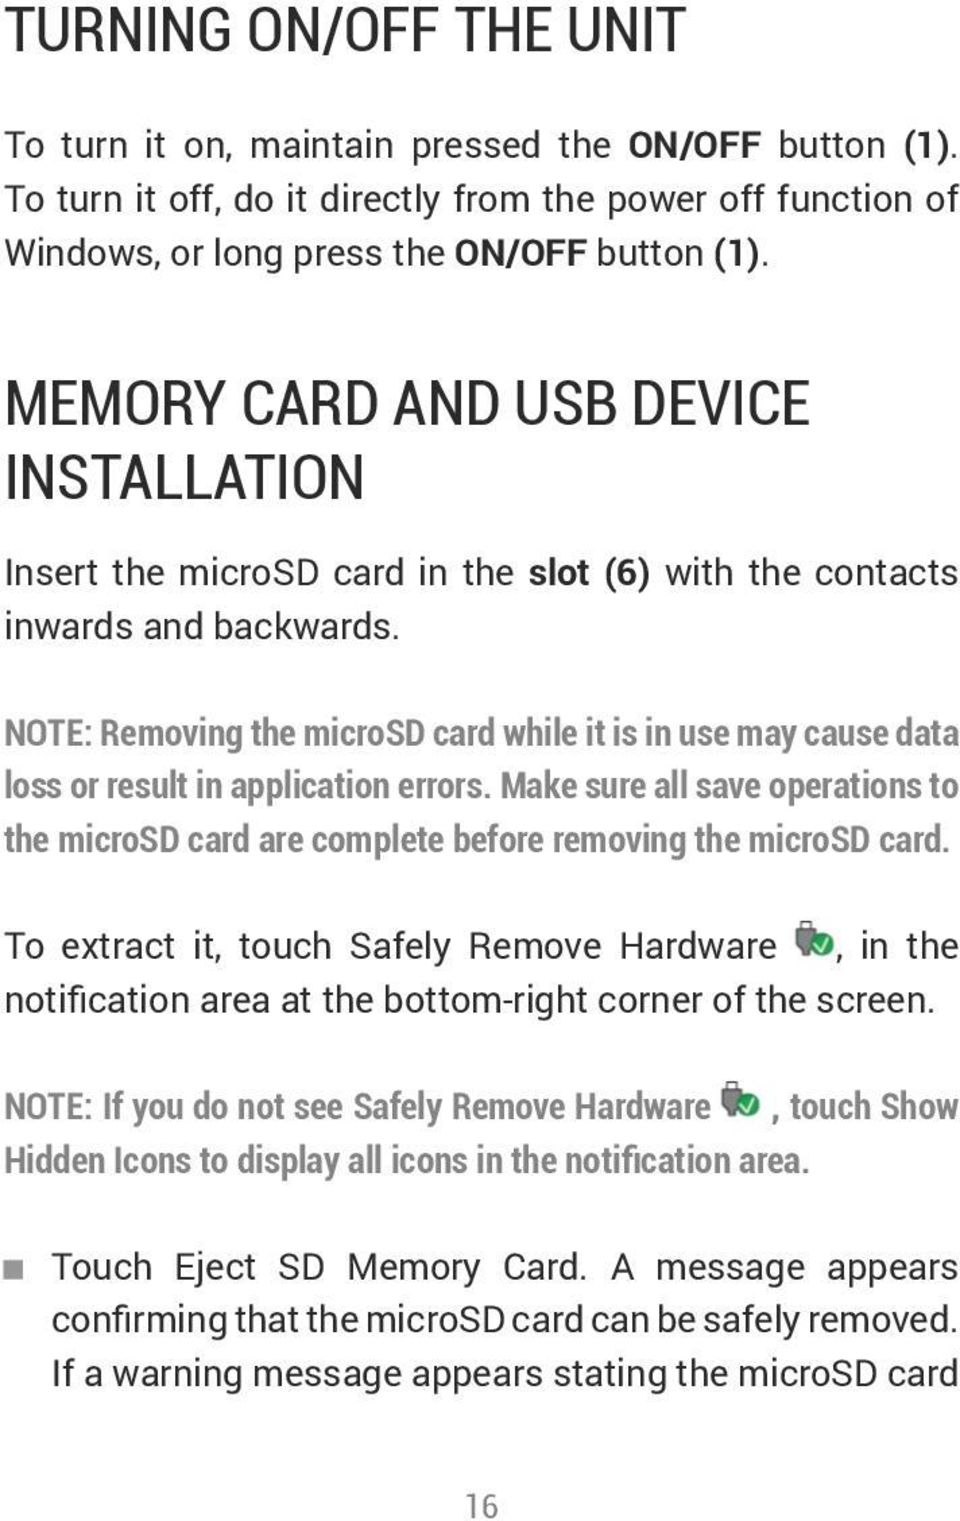 NOTE: Removing the microsd card while it is in use may cause data loss or result in application errors. Make sure all save operations to the microsd card are complete before removing the microsd card.